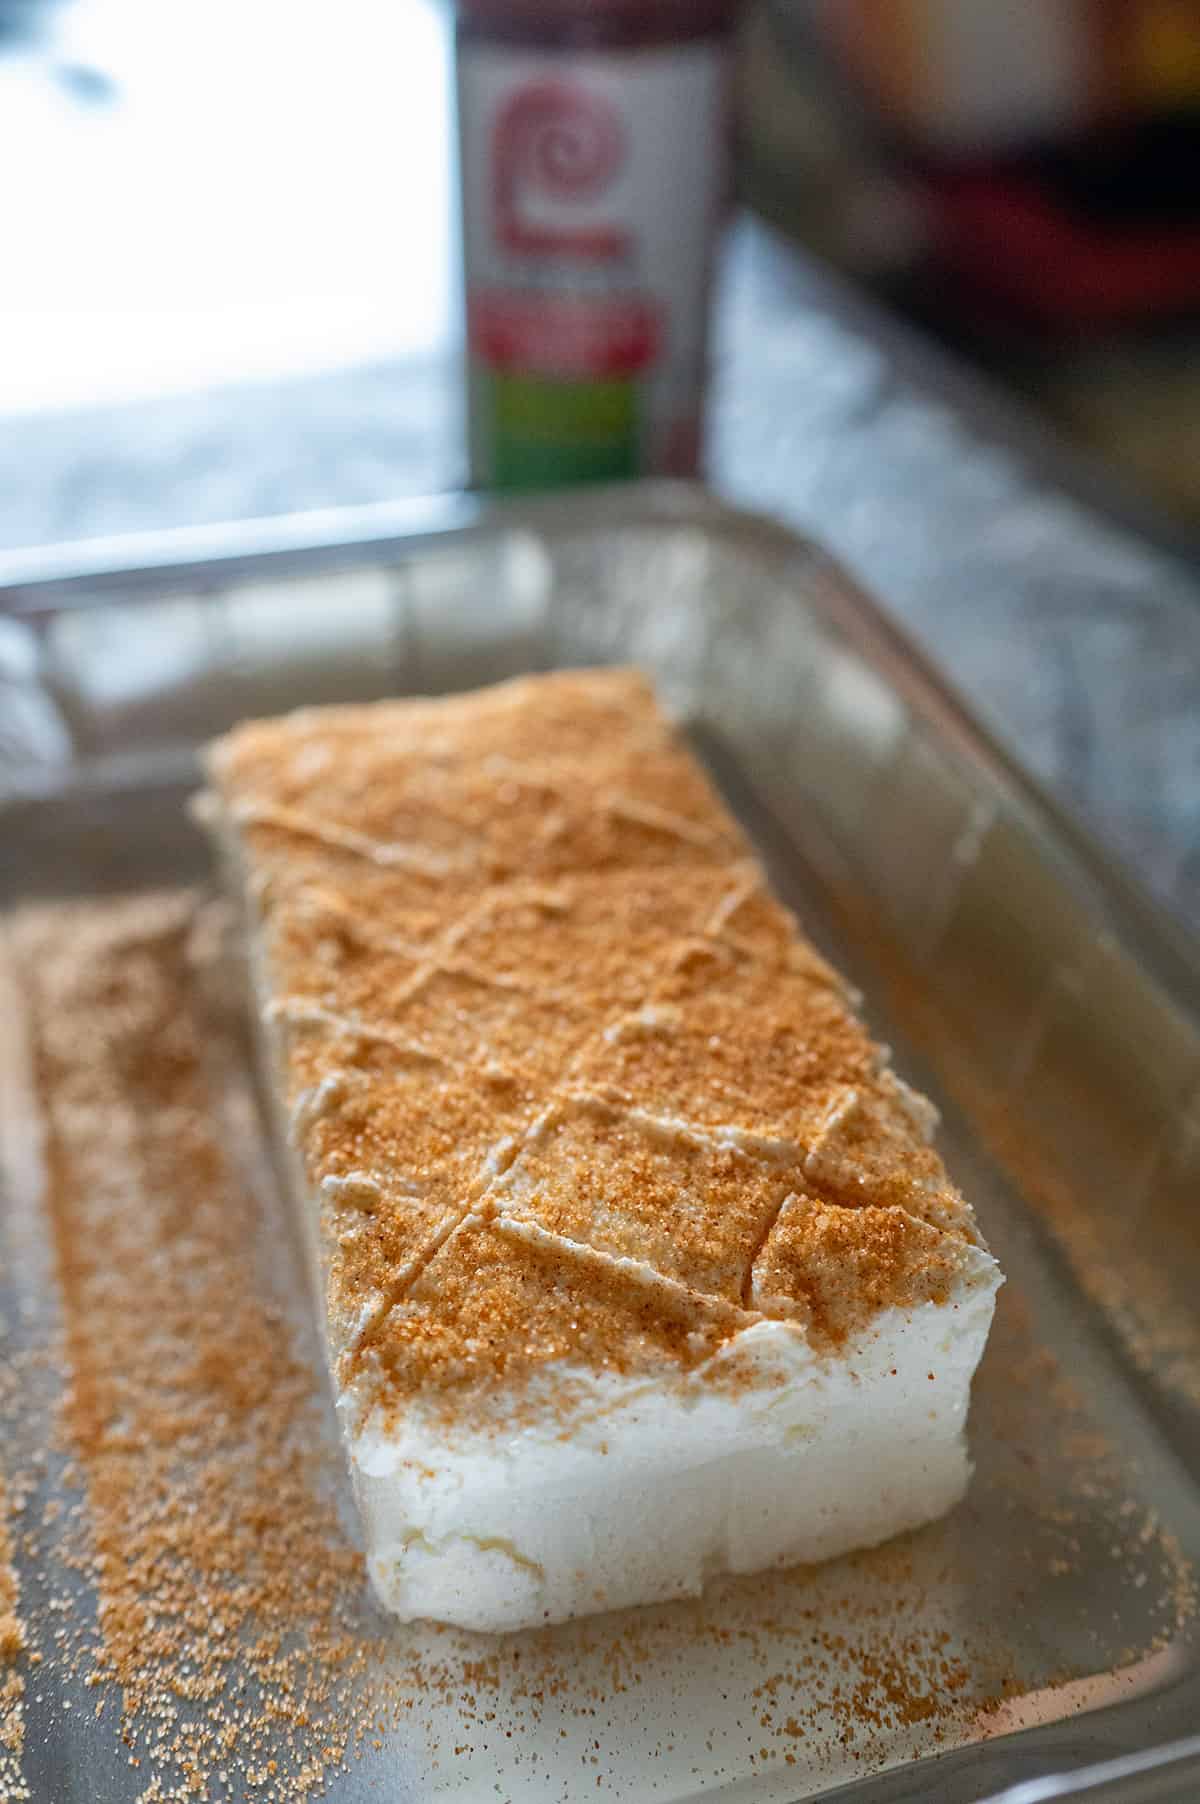 Cream cheese scored and topped with seasoning salt.